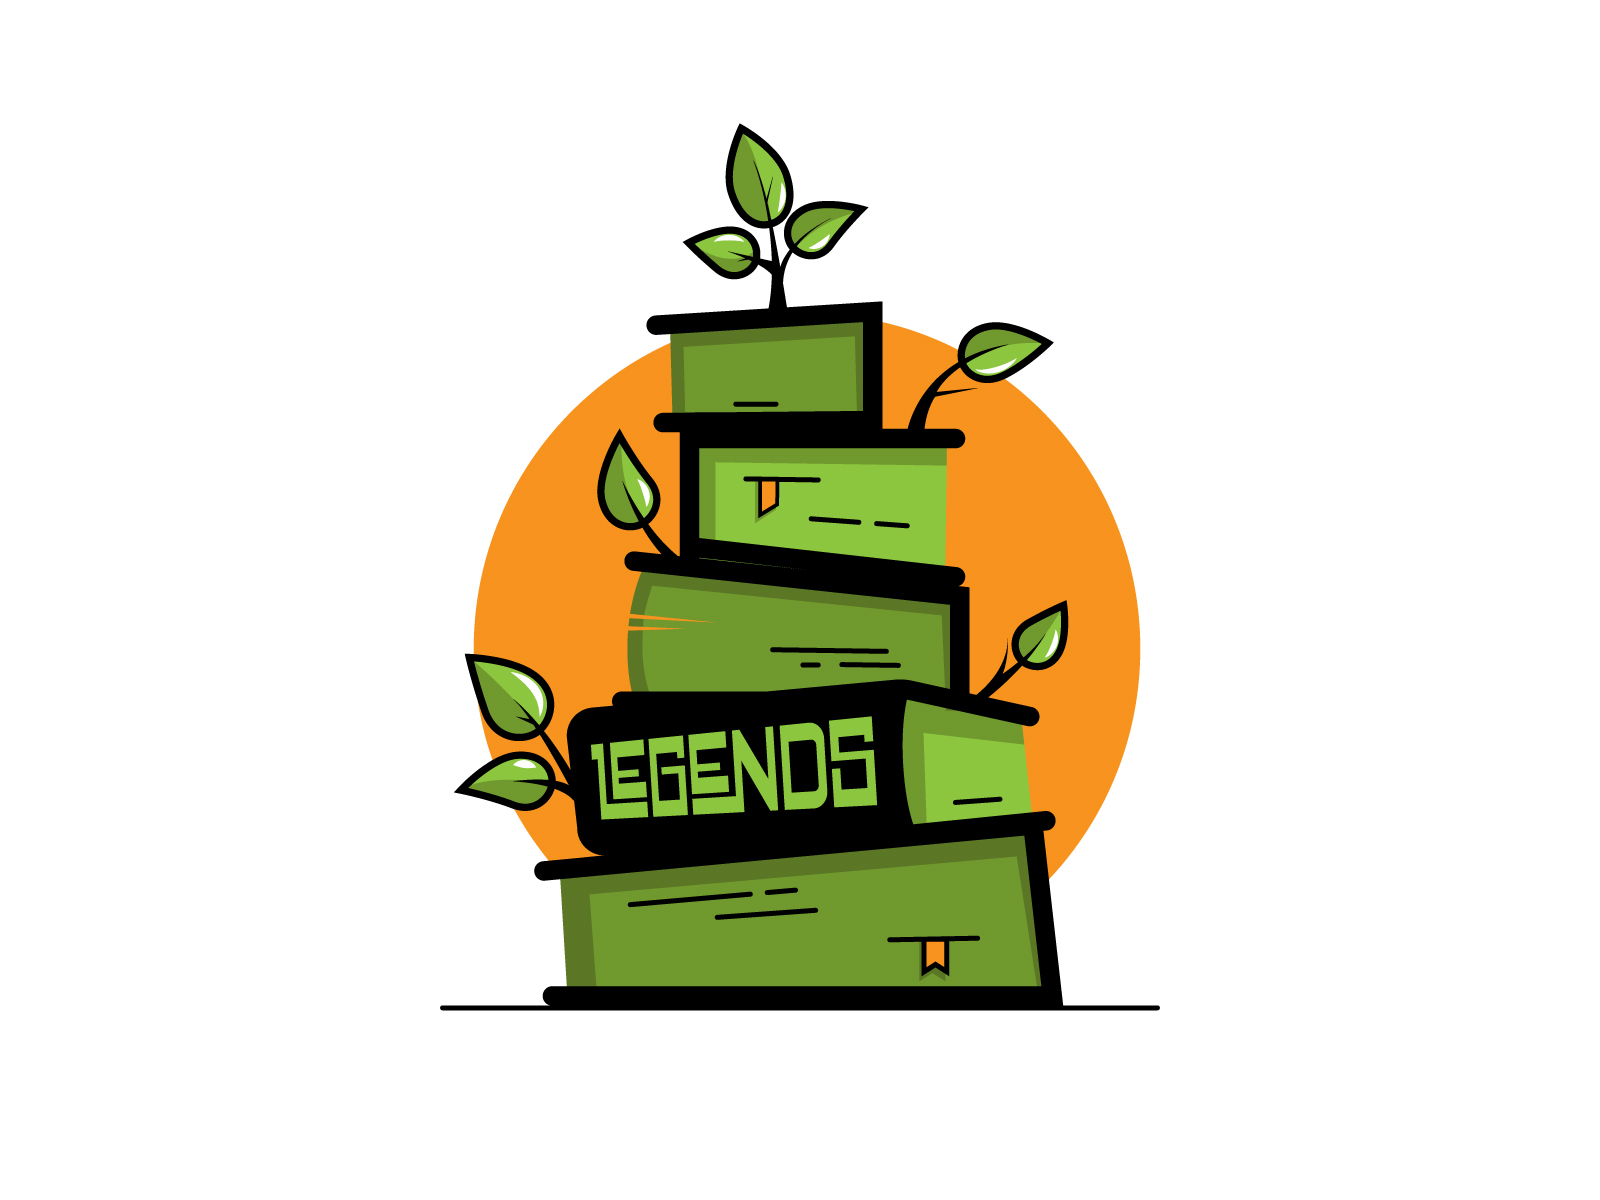 book-legends-by-thomas-c-park-on-dribbble